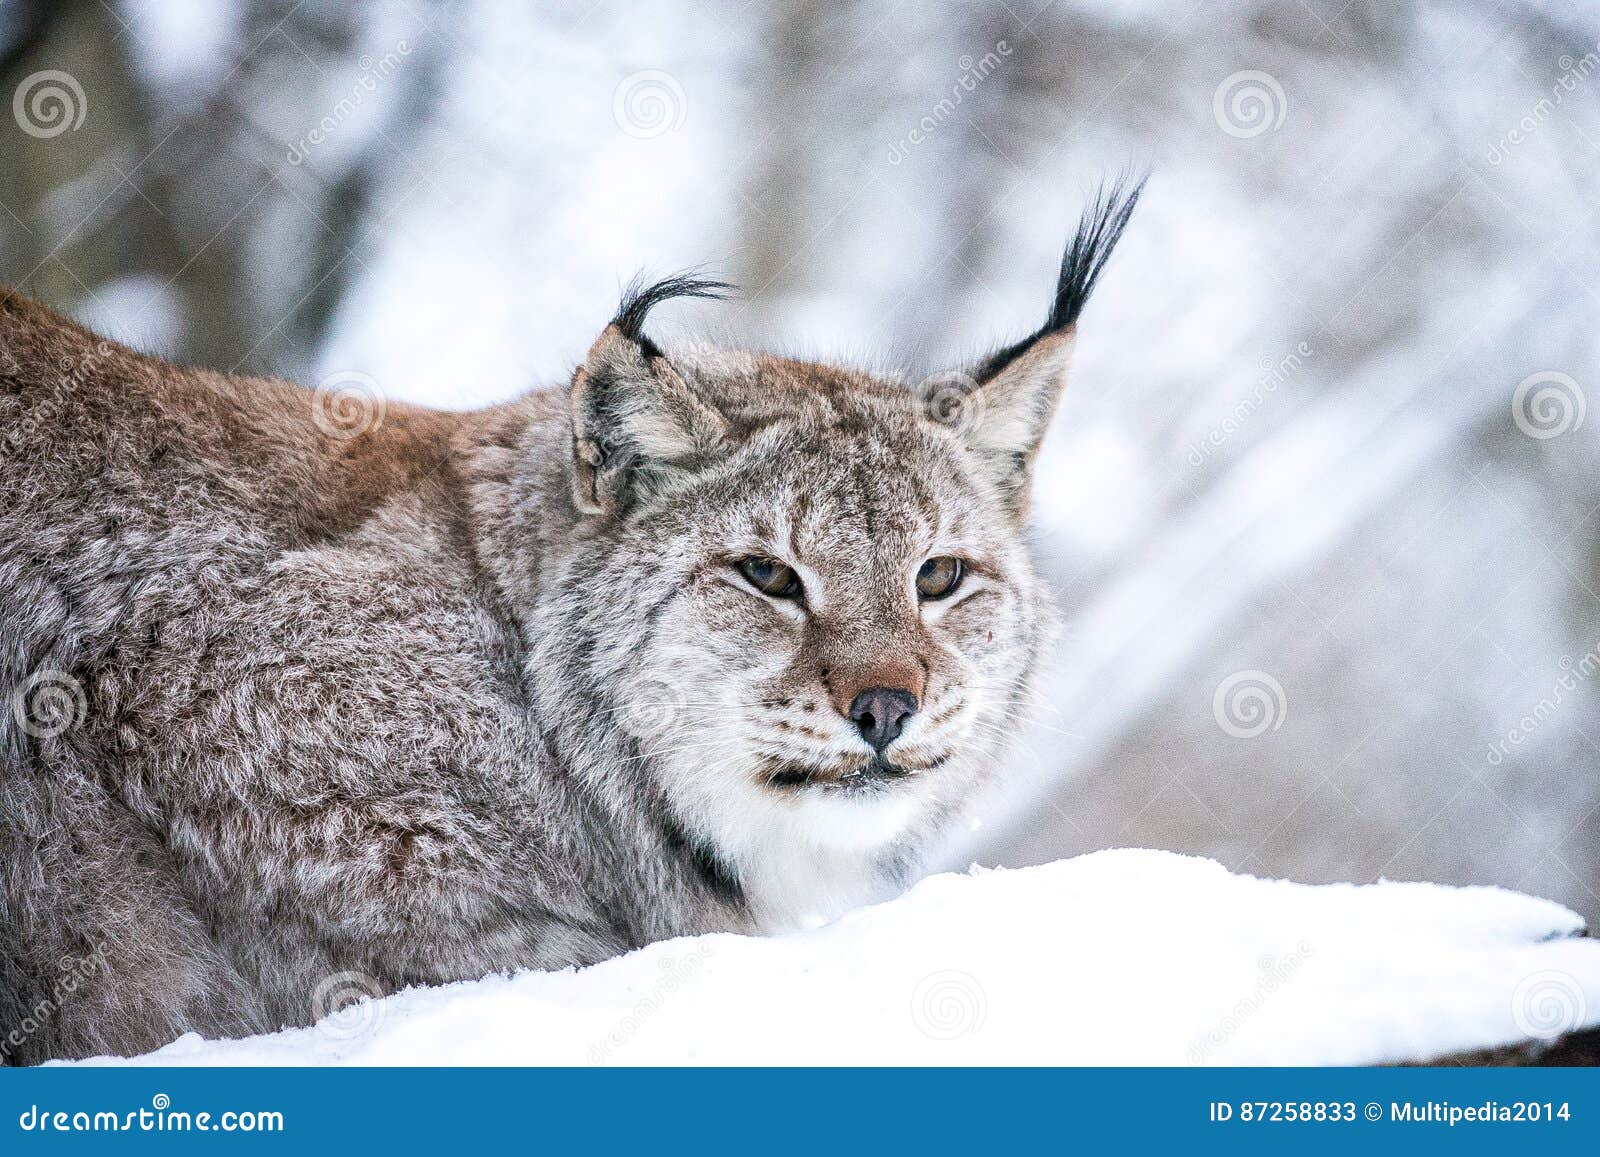 Lynx in a Winter Forest Close Up Stock Image - Image of coat, predator ...